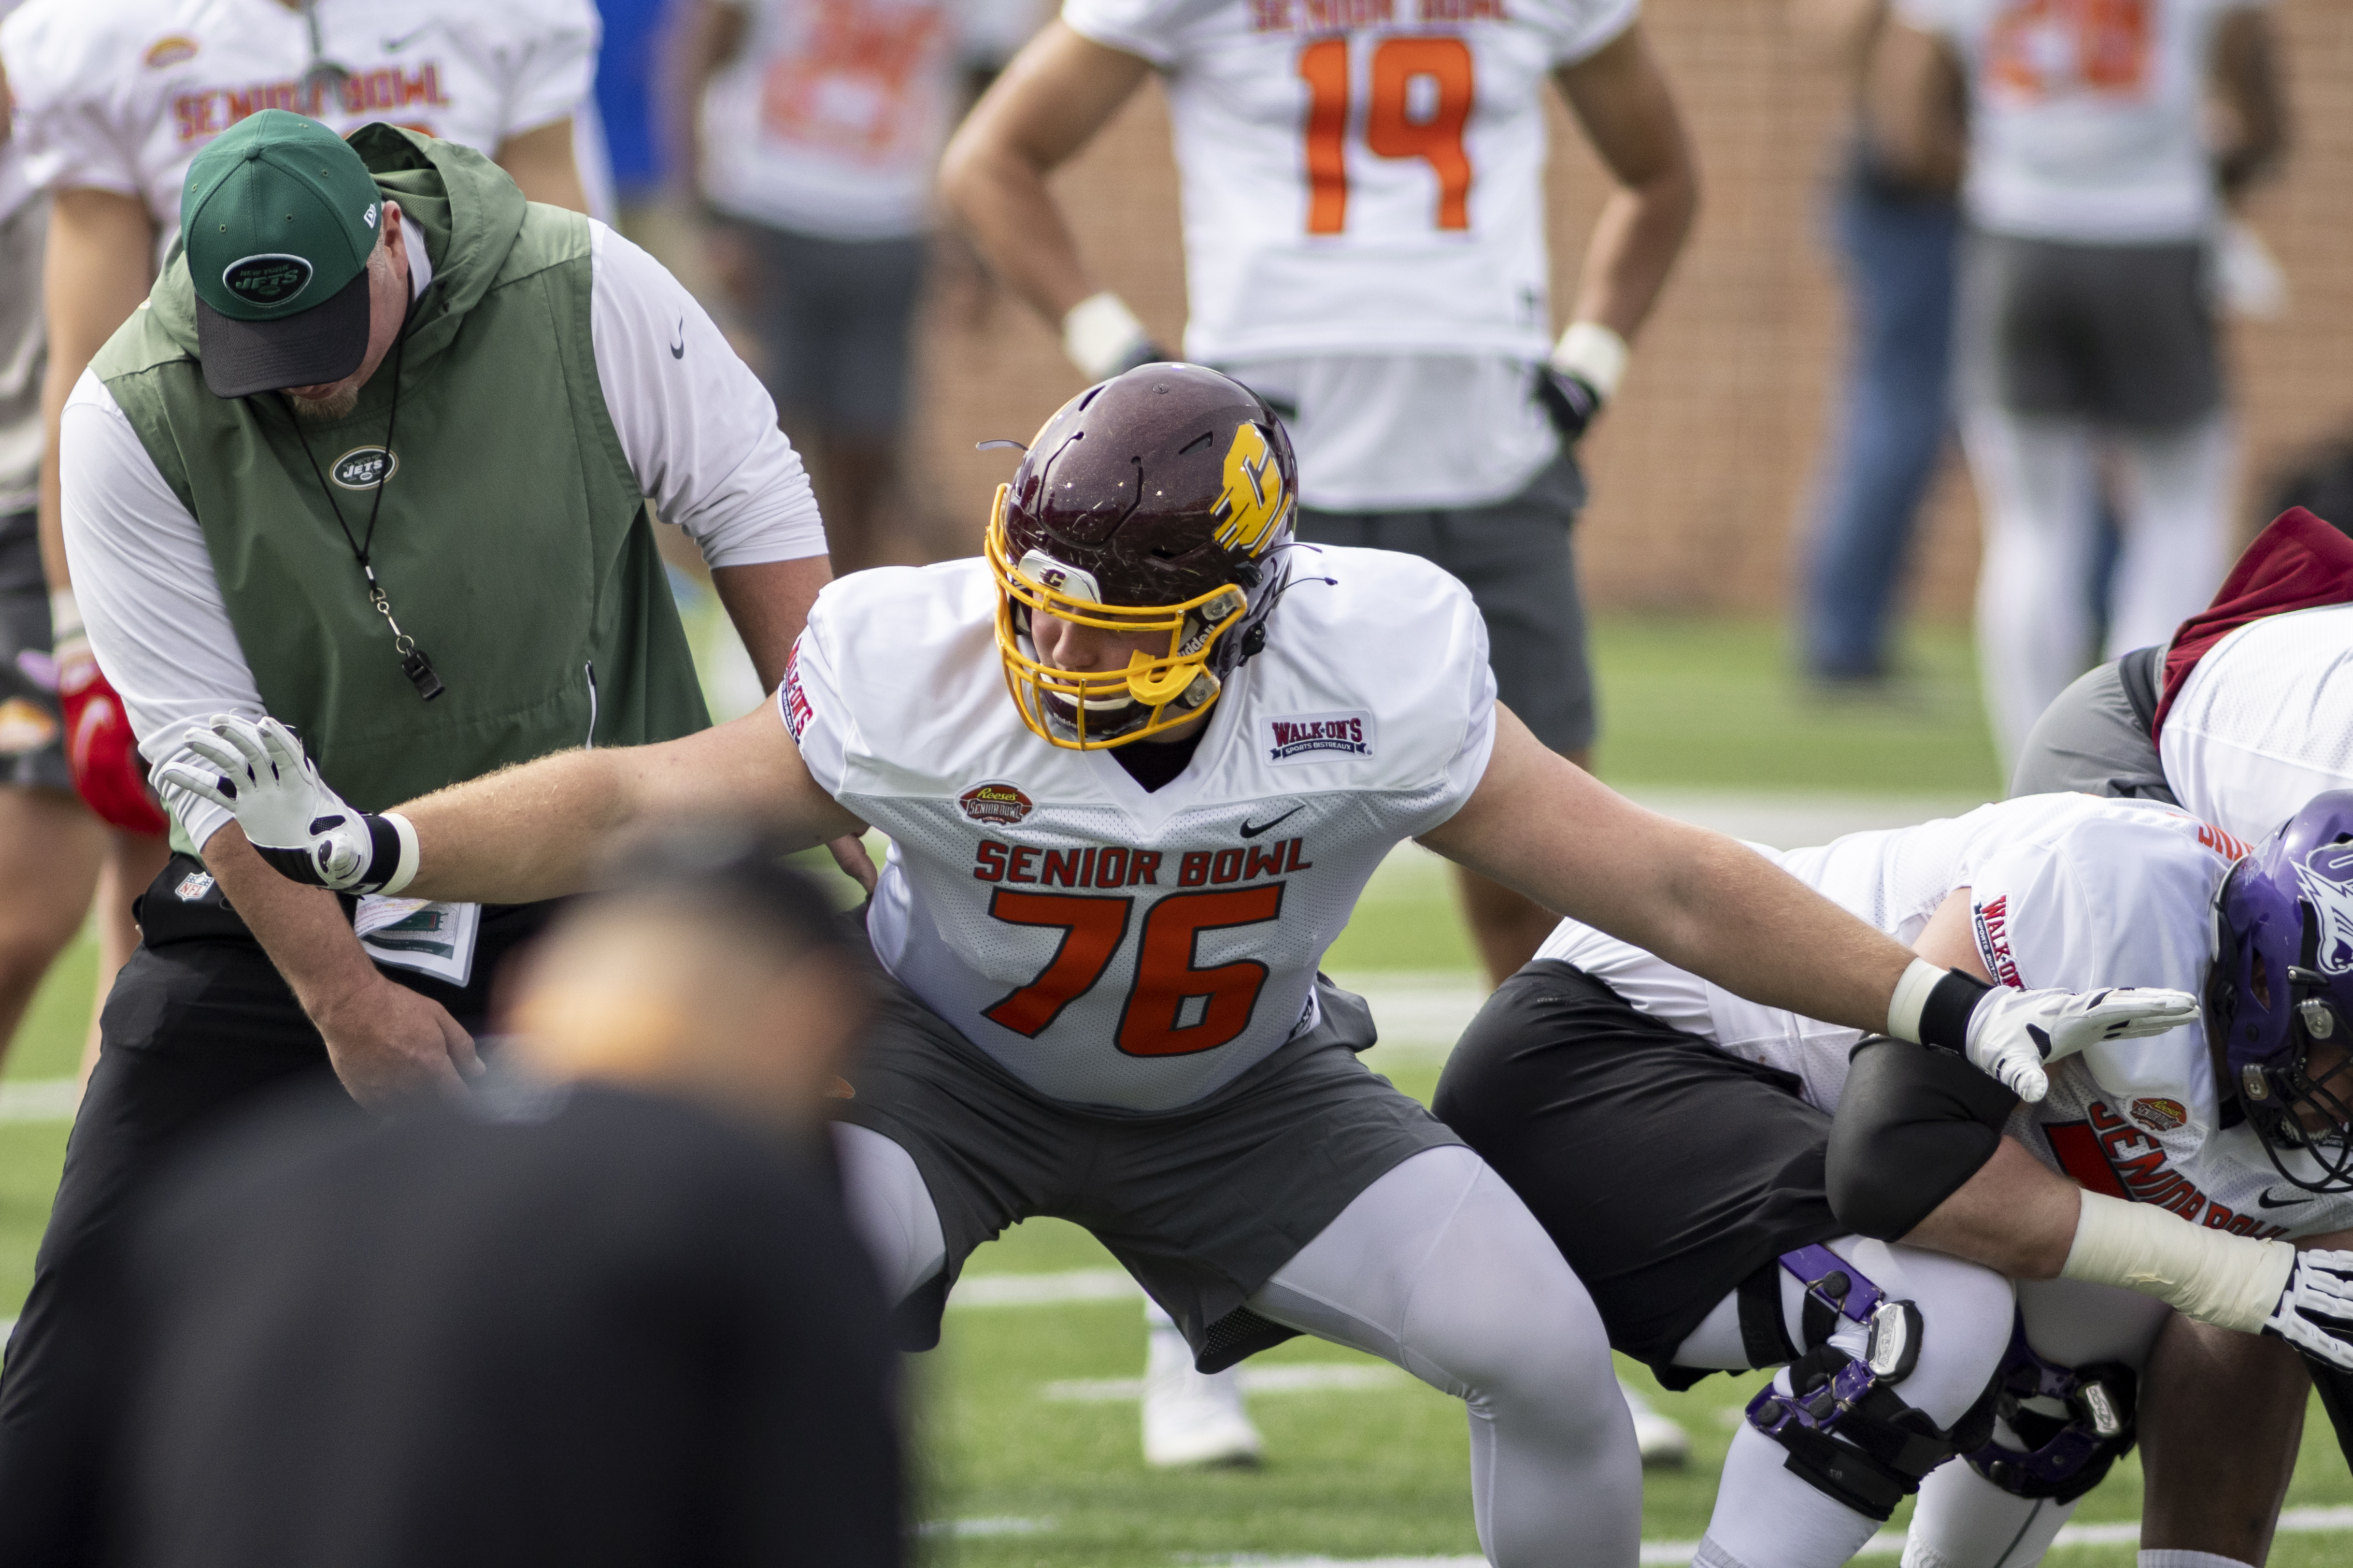 National offensive lineman Bernhard Raimann of Central Michigan (76) works with a coach during National practice for the 2022 Senior Bowl at Hancock Whitney Stadium. National offensive lineman Bernhard Raimann of Central Michigan (76) works with a coach during National practice for the 2022 Senior Bowl at Hancock Whitney Stadium.